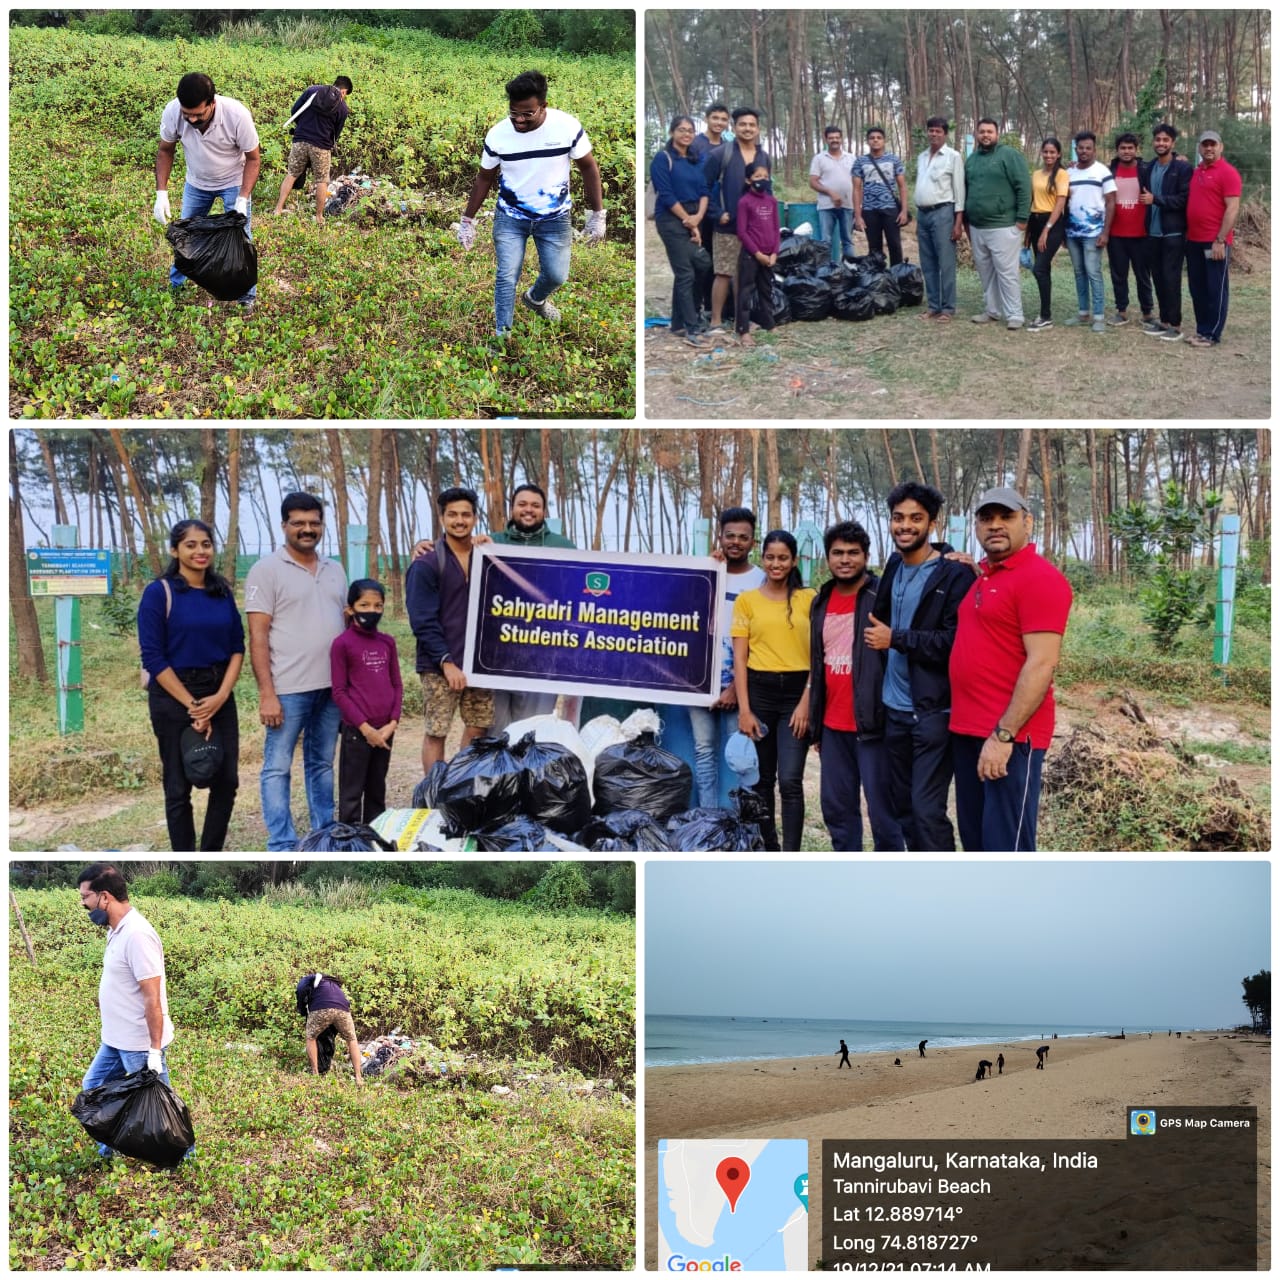 MBA Student Council organizes Beach Cleaning Activity